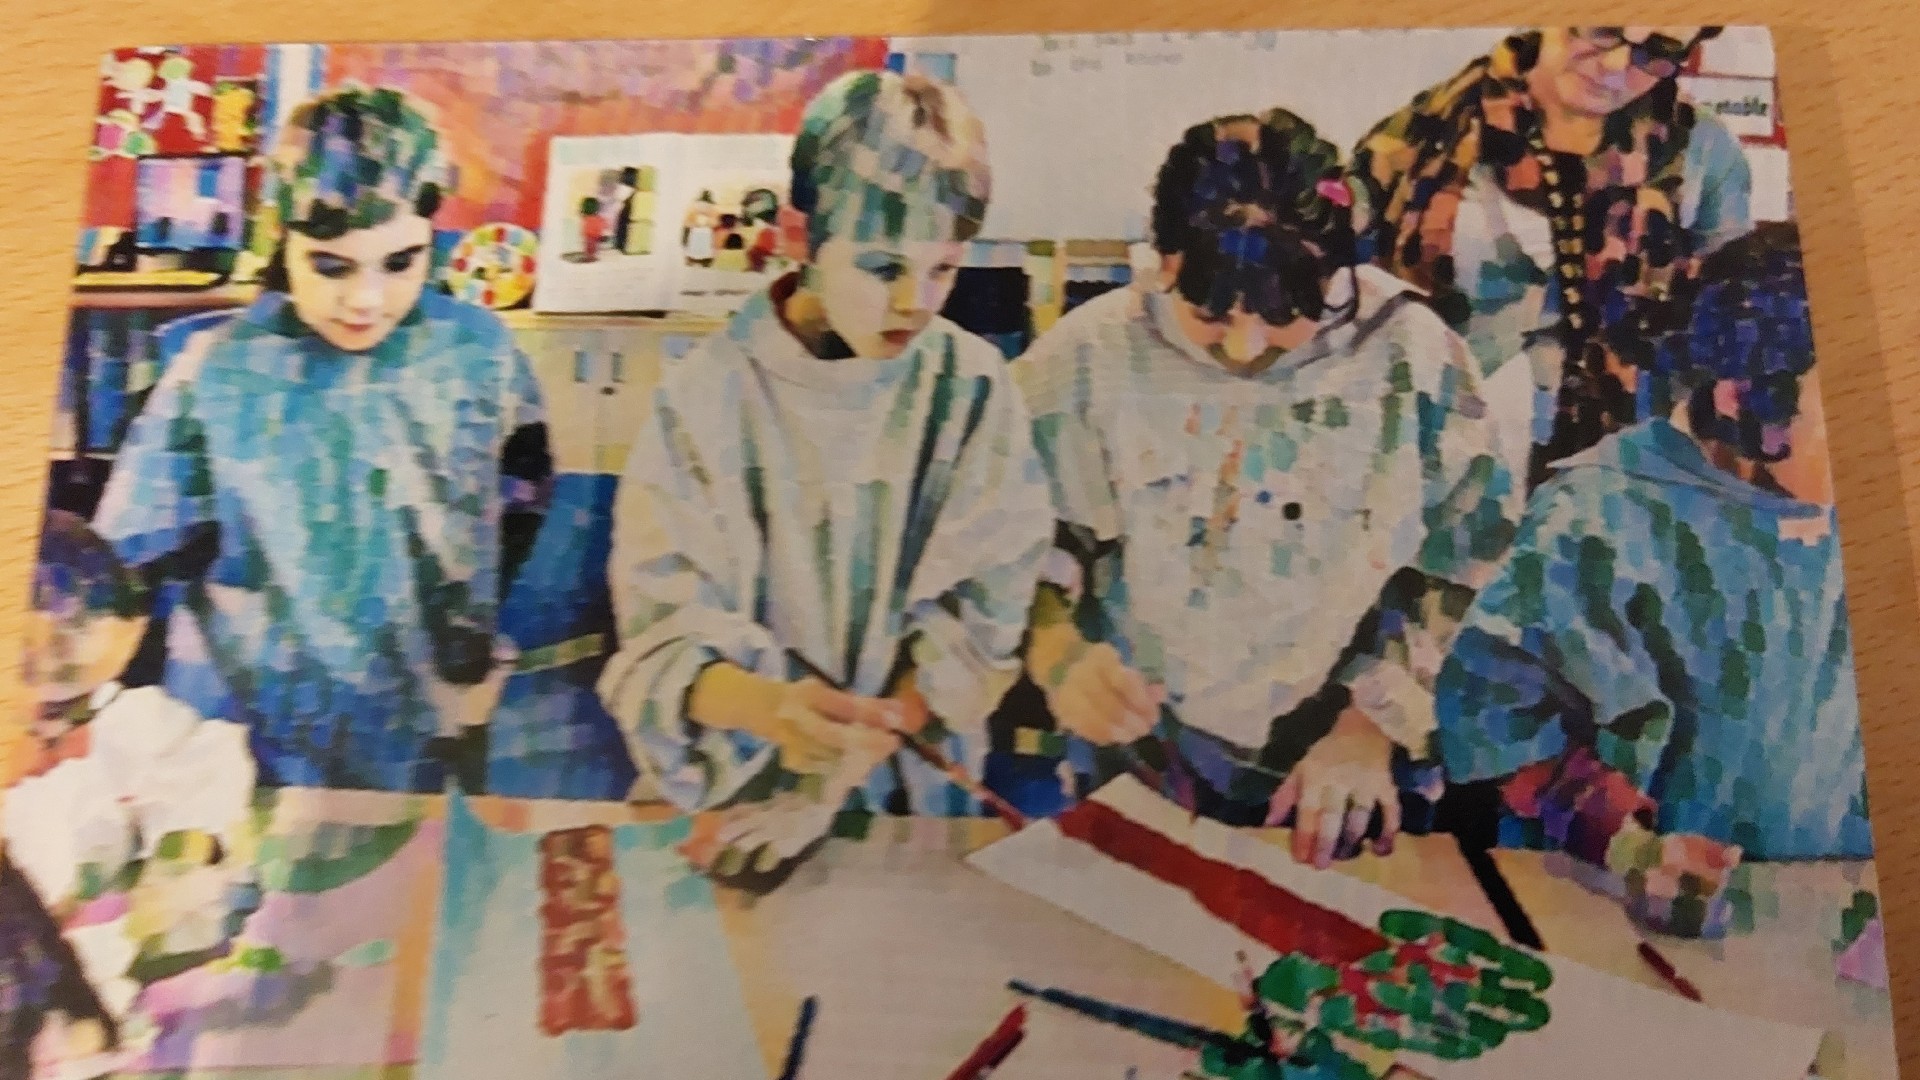 A painting of children working on their own paintings in a classroom.